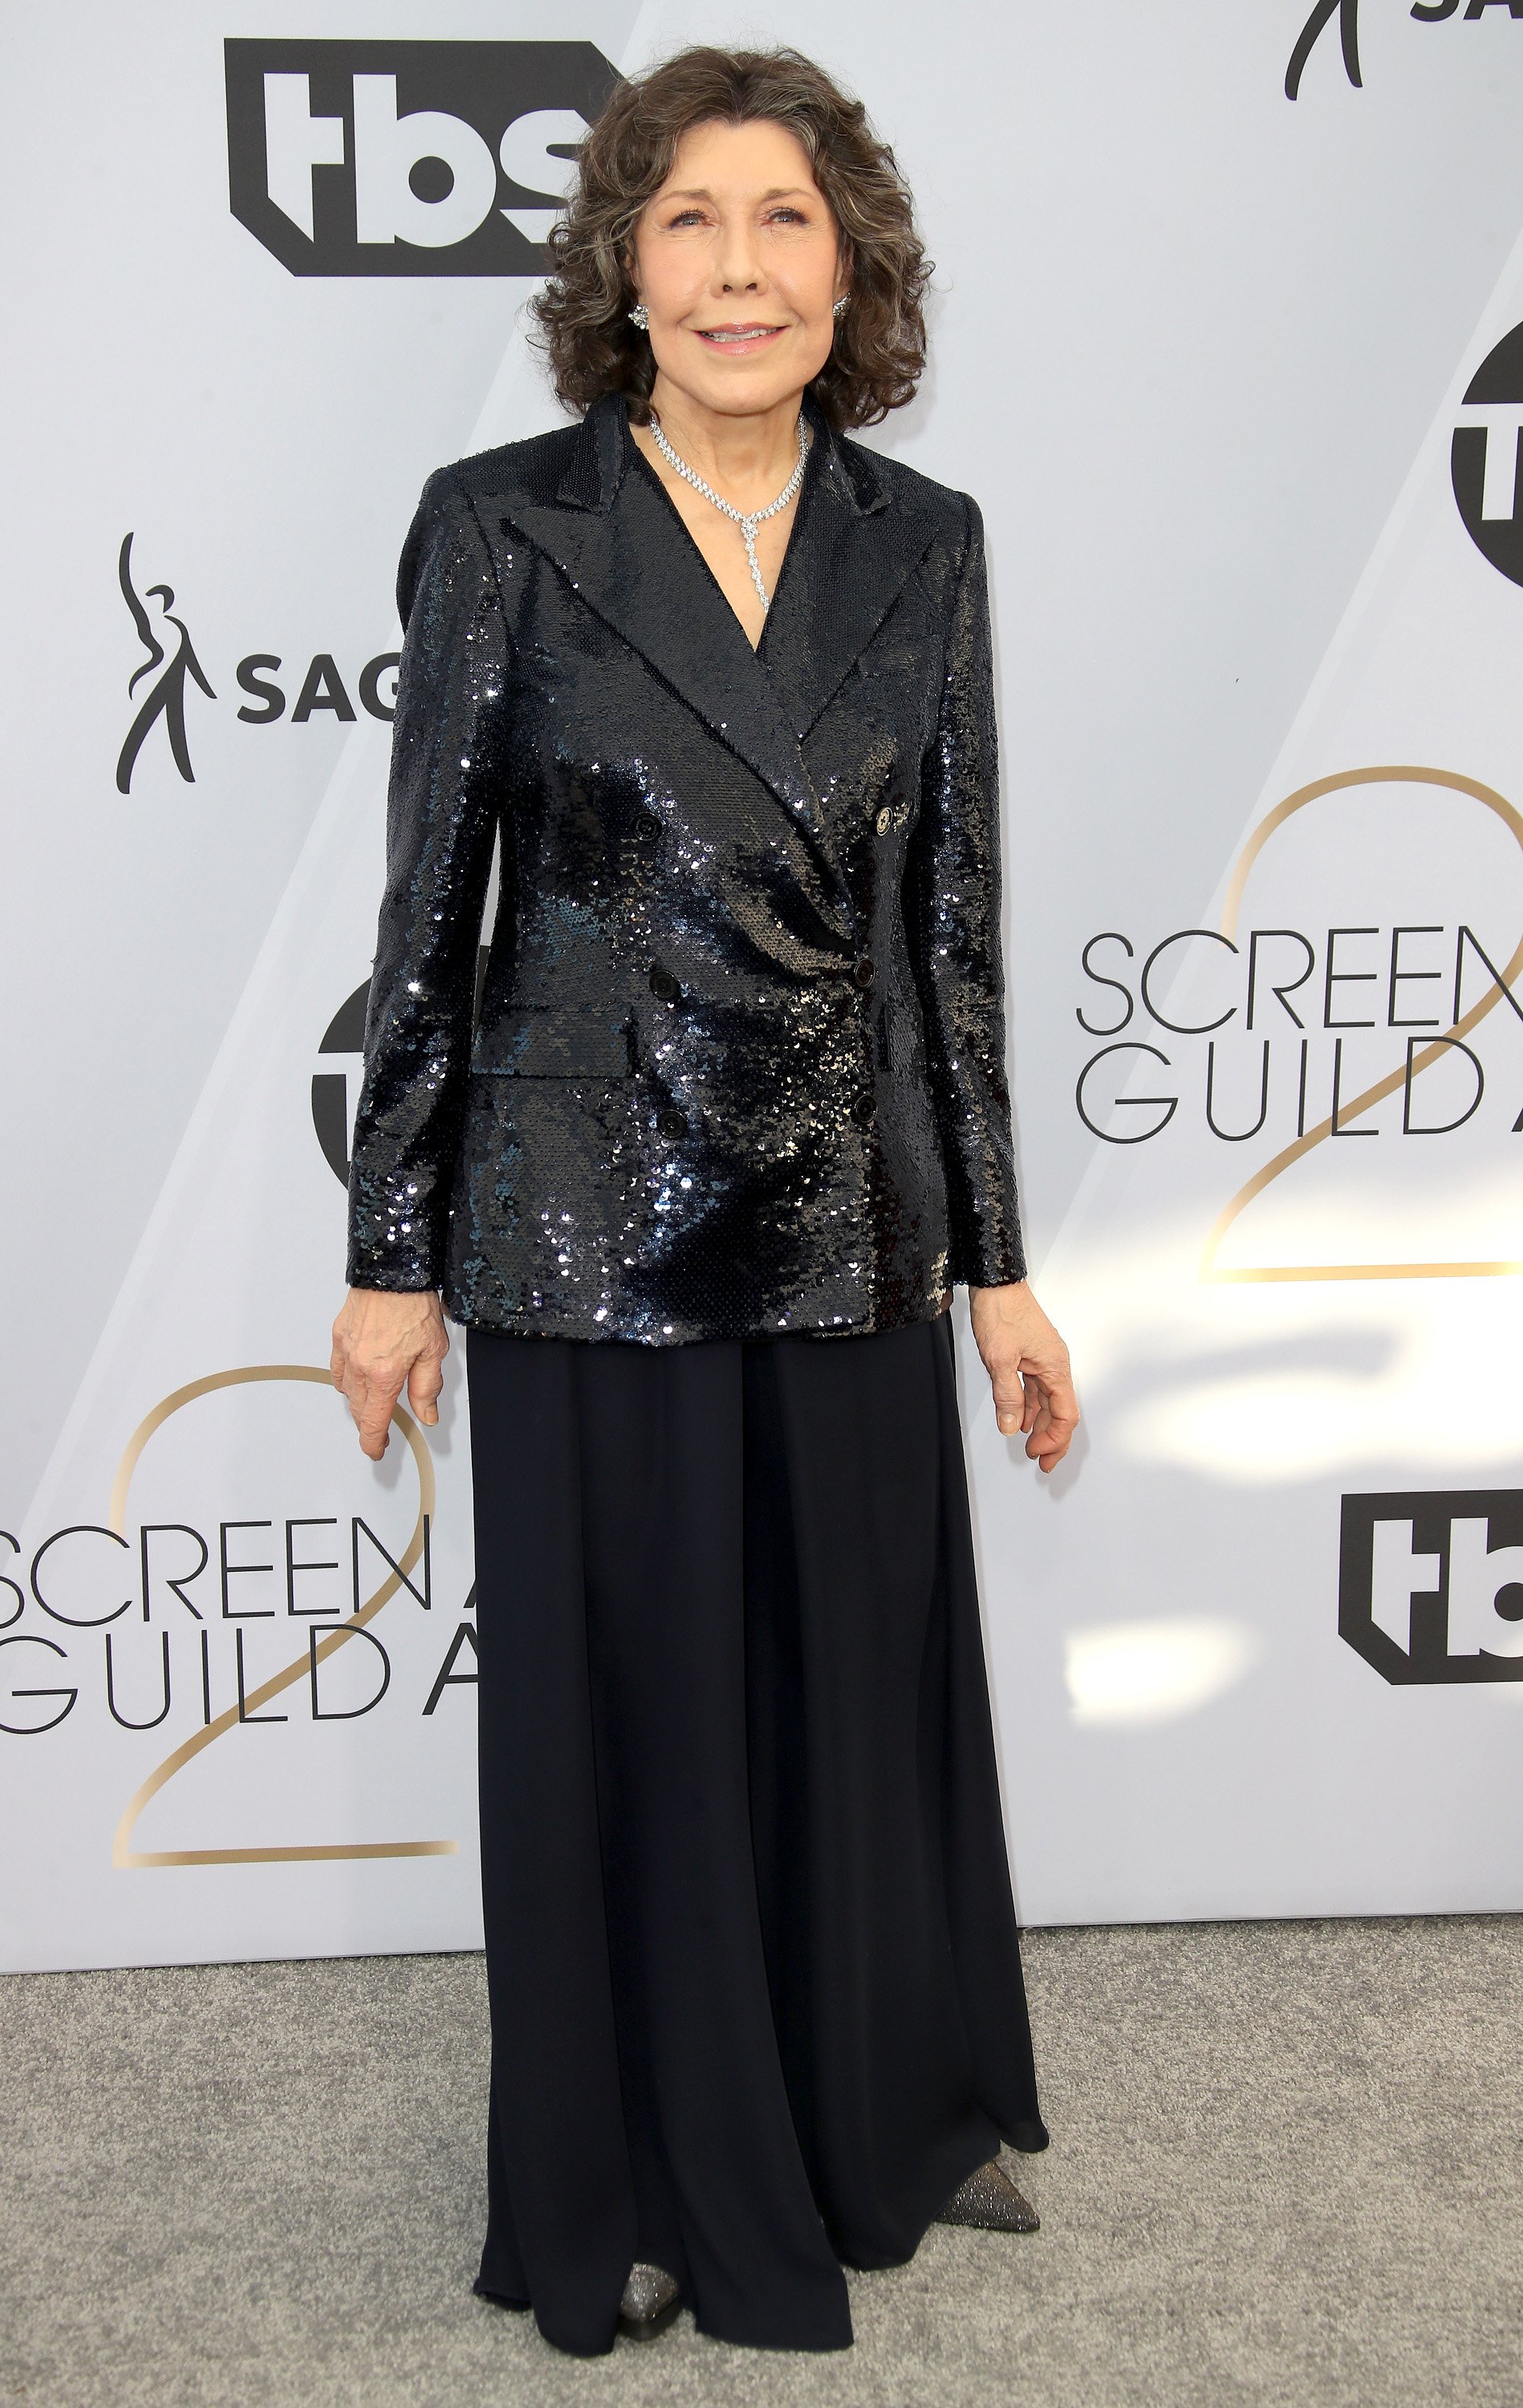 Lily Tomlin attends the 25th Annual Screen Actors Guild Awards at The Shrine Auditorium on January 27, 2019. | Source: Getty Images